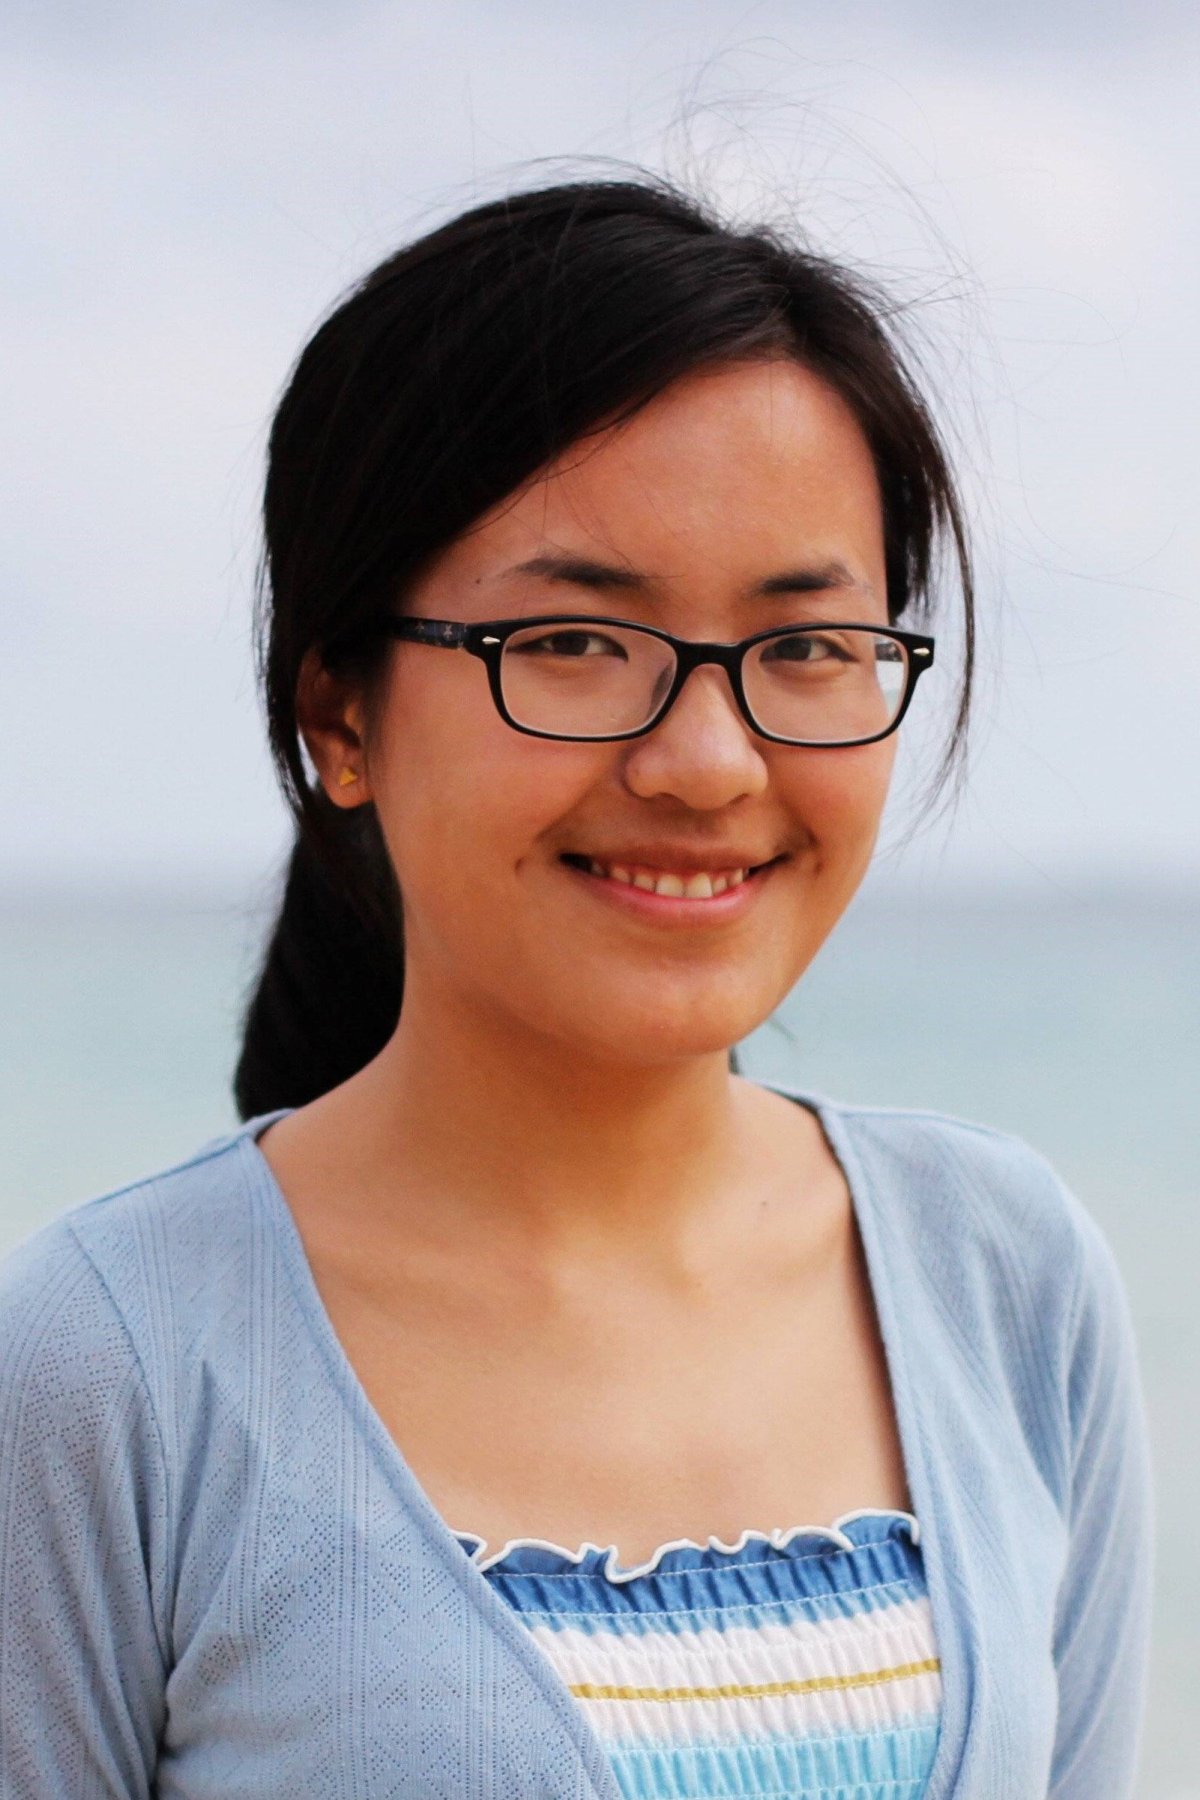 Yang (Katie) Zhao standing outdoors in a blue blouse and sweater smiling into the camera